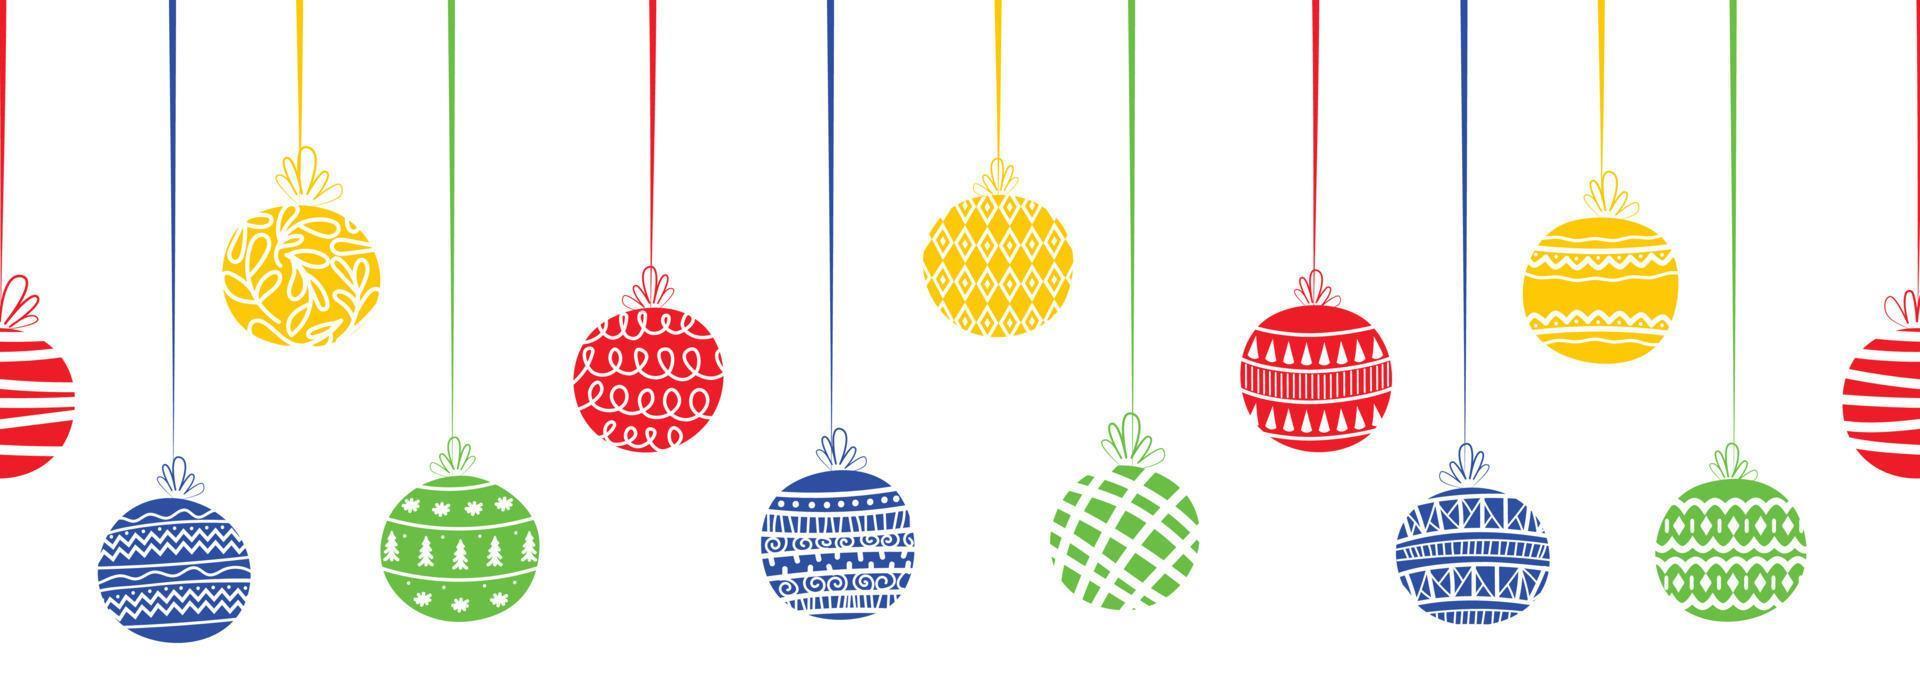 seamless pattern banner christmas balls flat minimalistic style. transparent pattern. zigzag, points, lines, waves, trees, snowflakes. for websites, profile headers vector